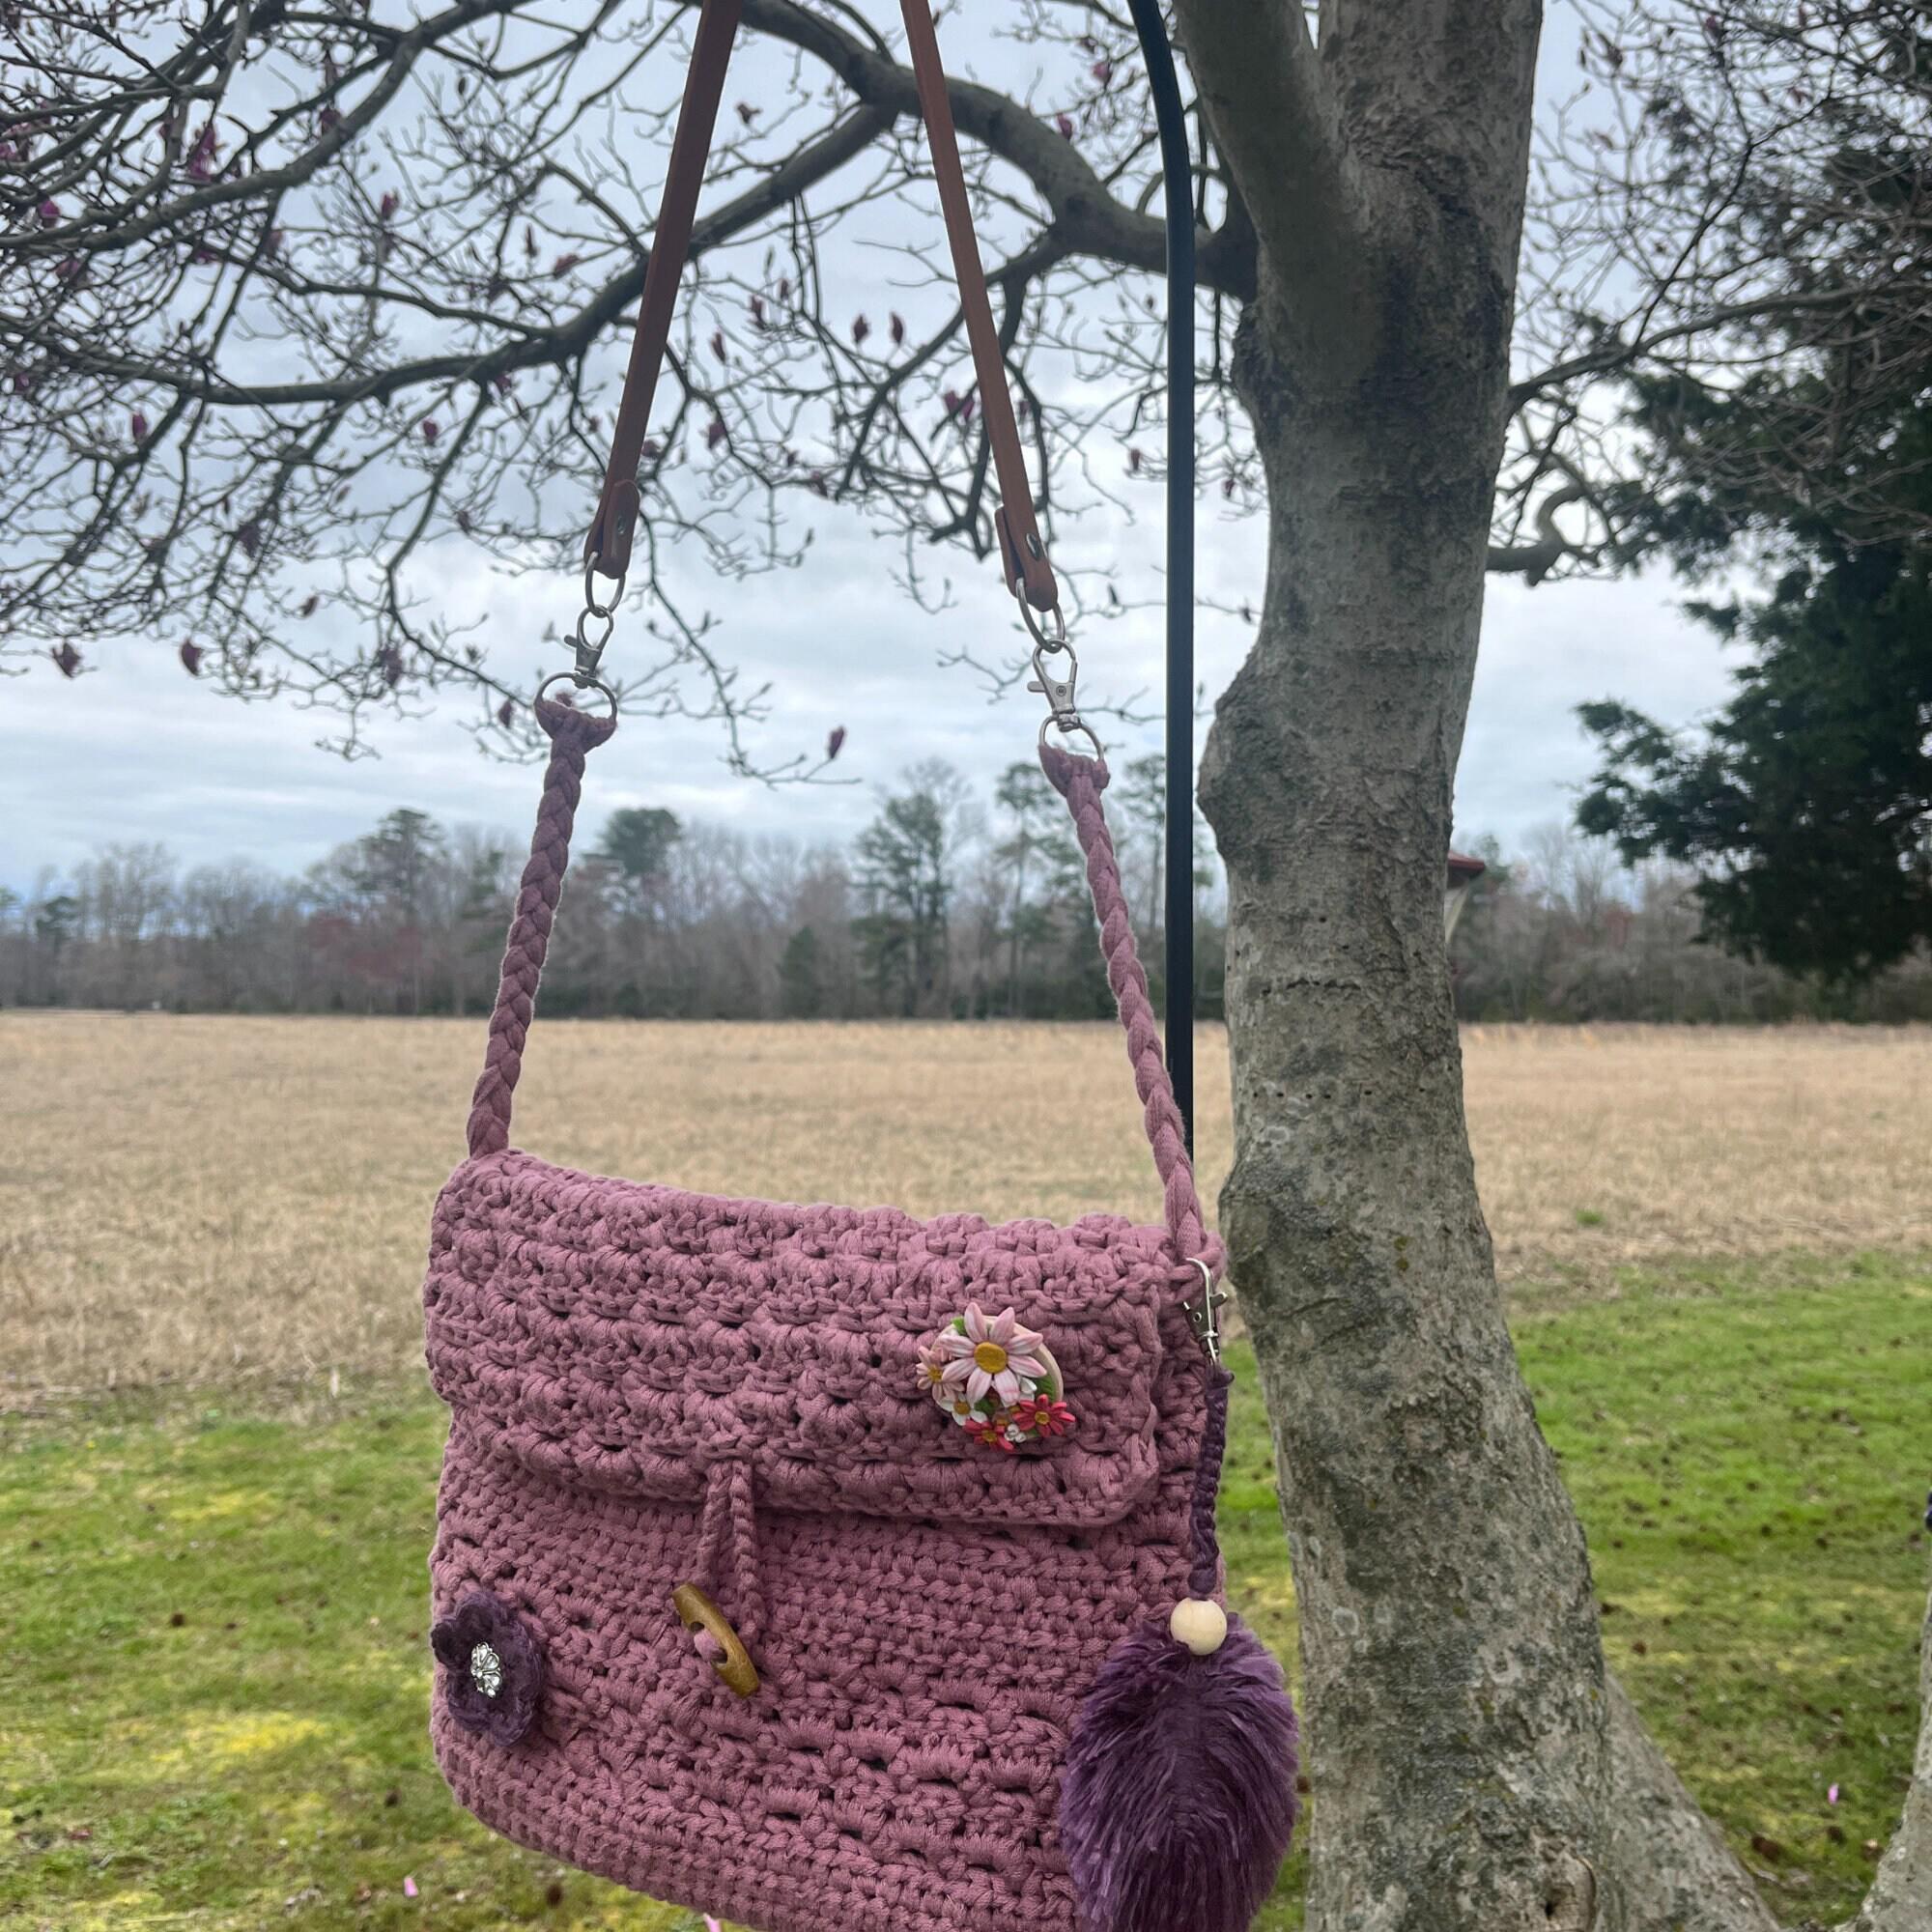 Stunning Crochet Bags Collection